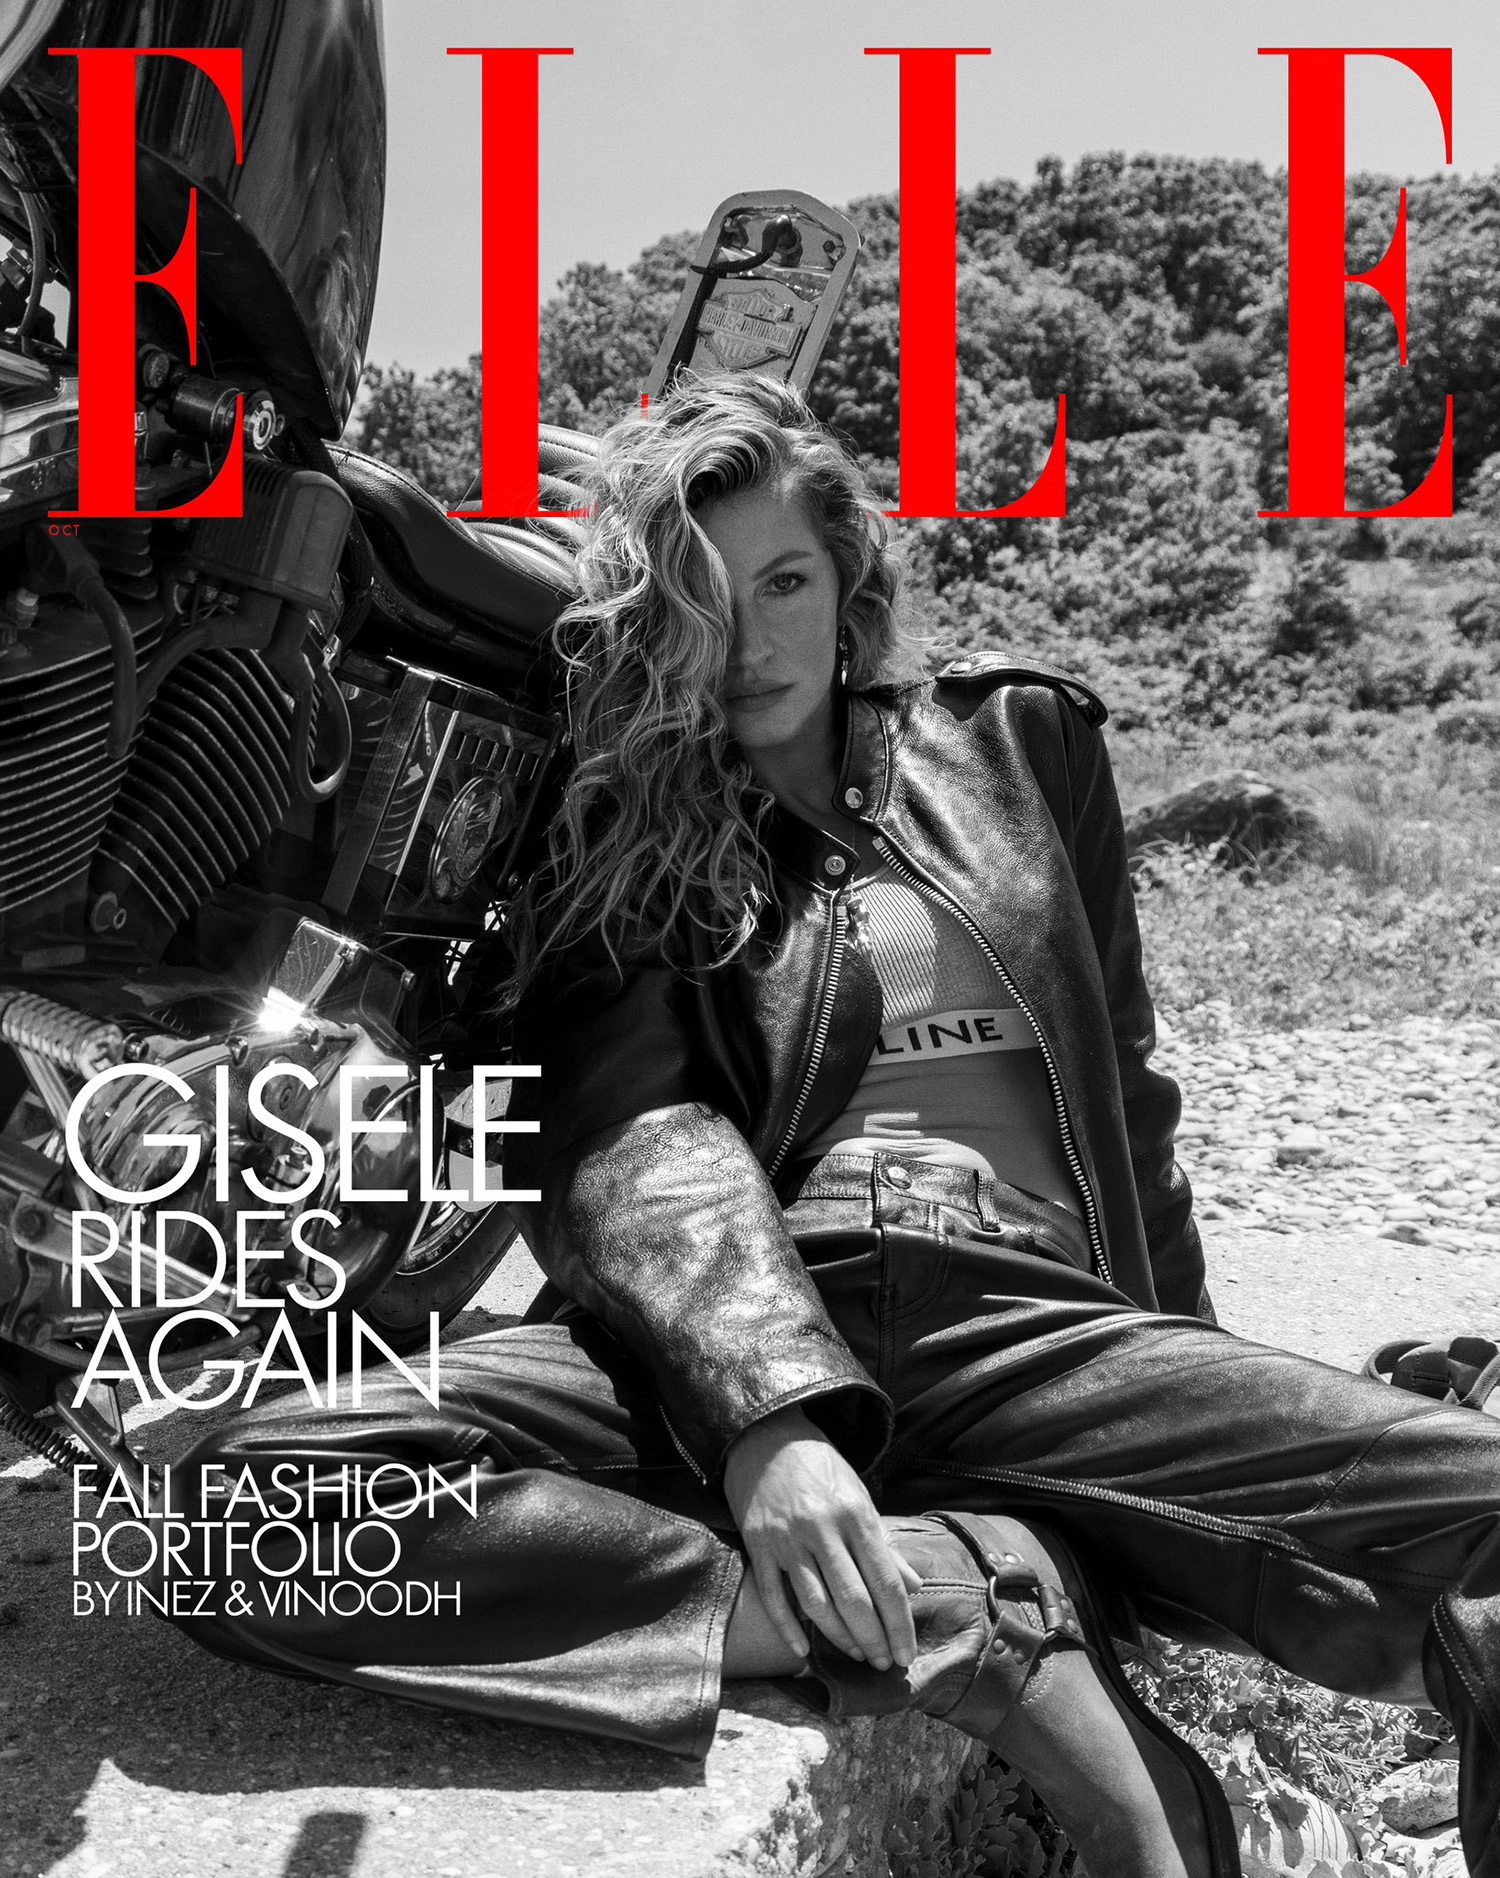 Gisele Bündchen covers Elle US October 2022 by Inez and Vinoodh